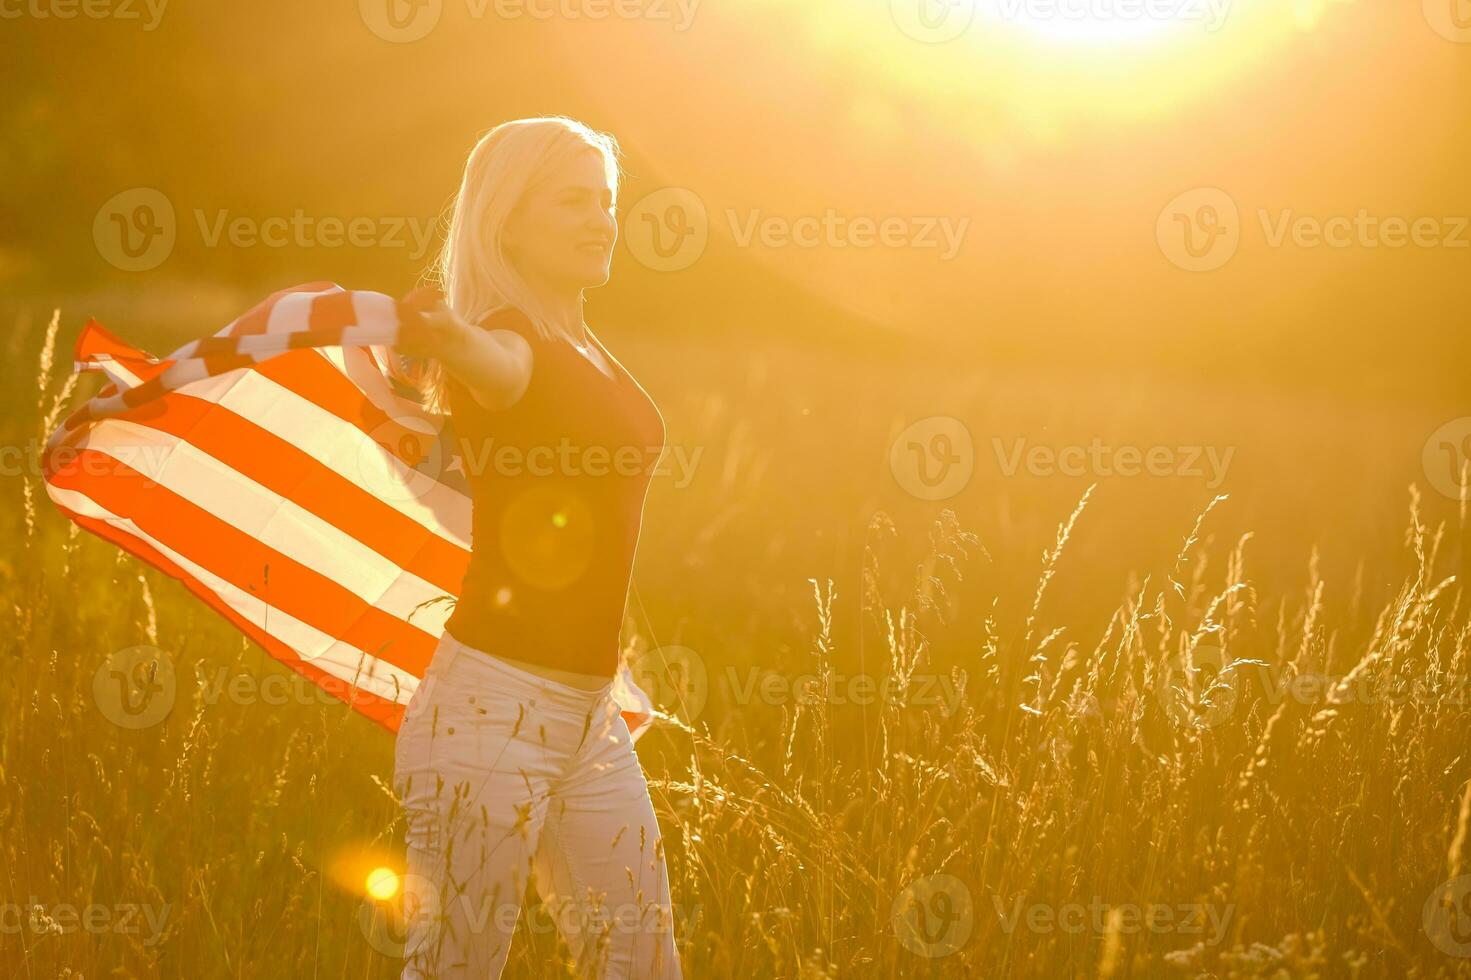 Beautiful young girl holding an American flag in the wind in a field of rye. Summer landscape against the blue sky. Horizontal orientation. photo